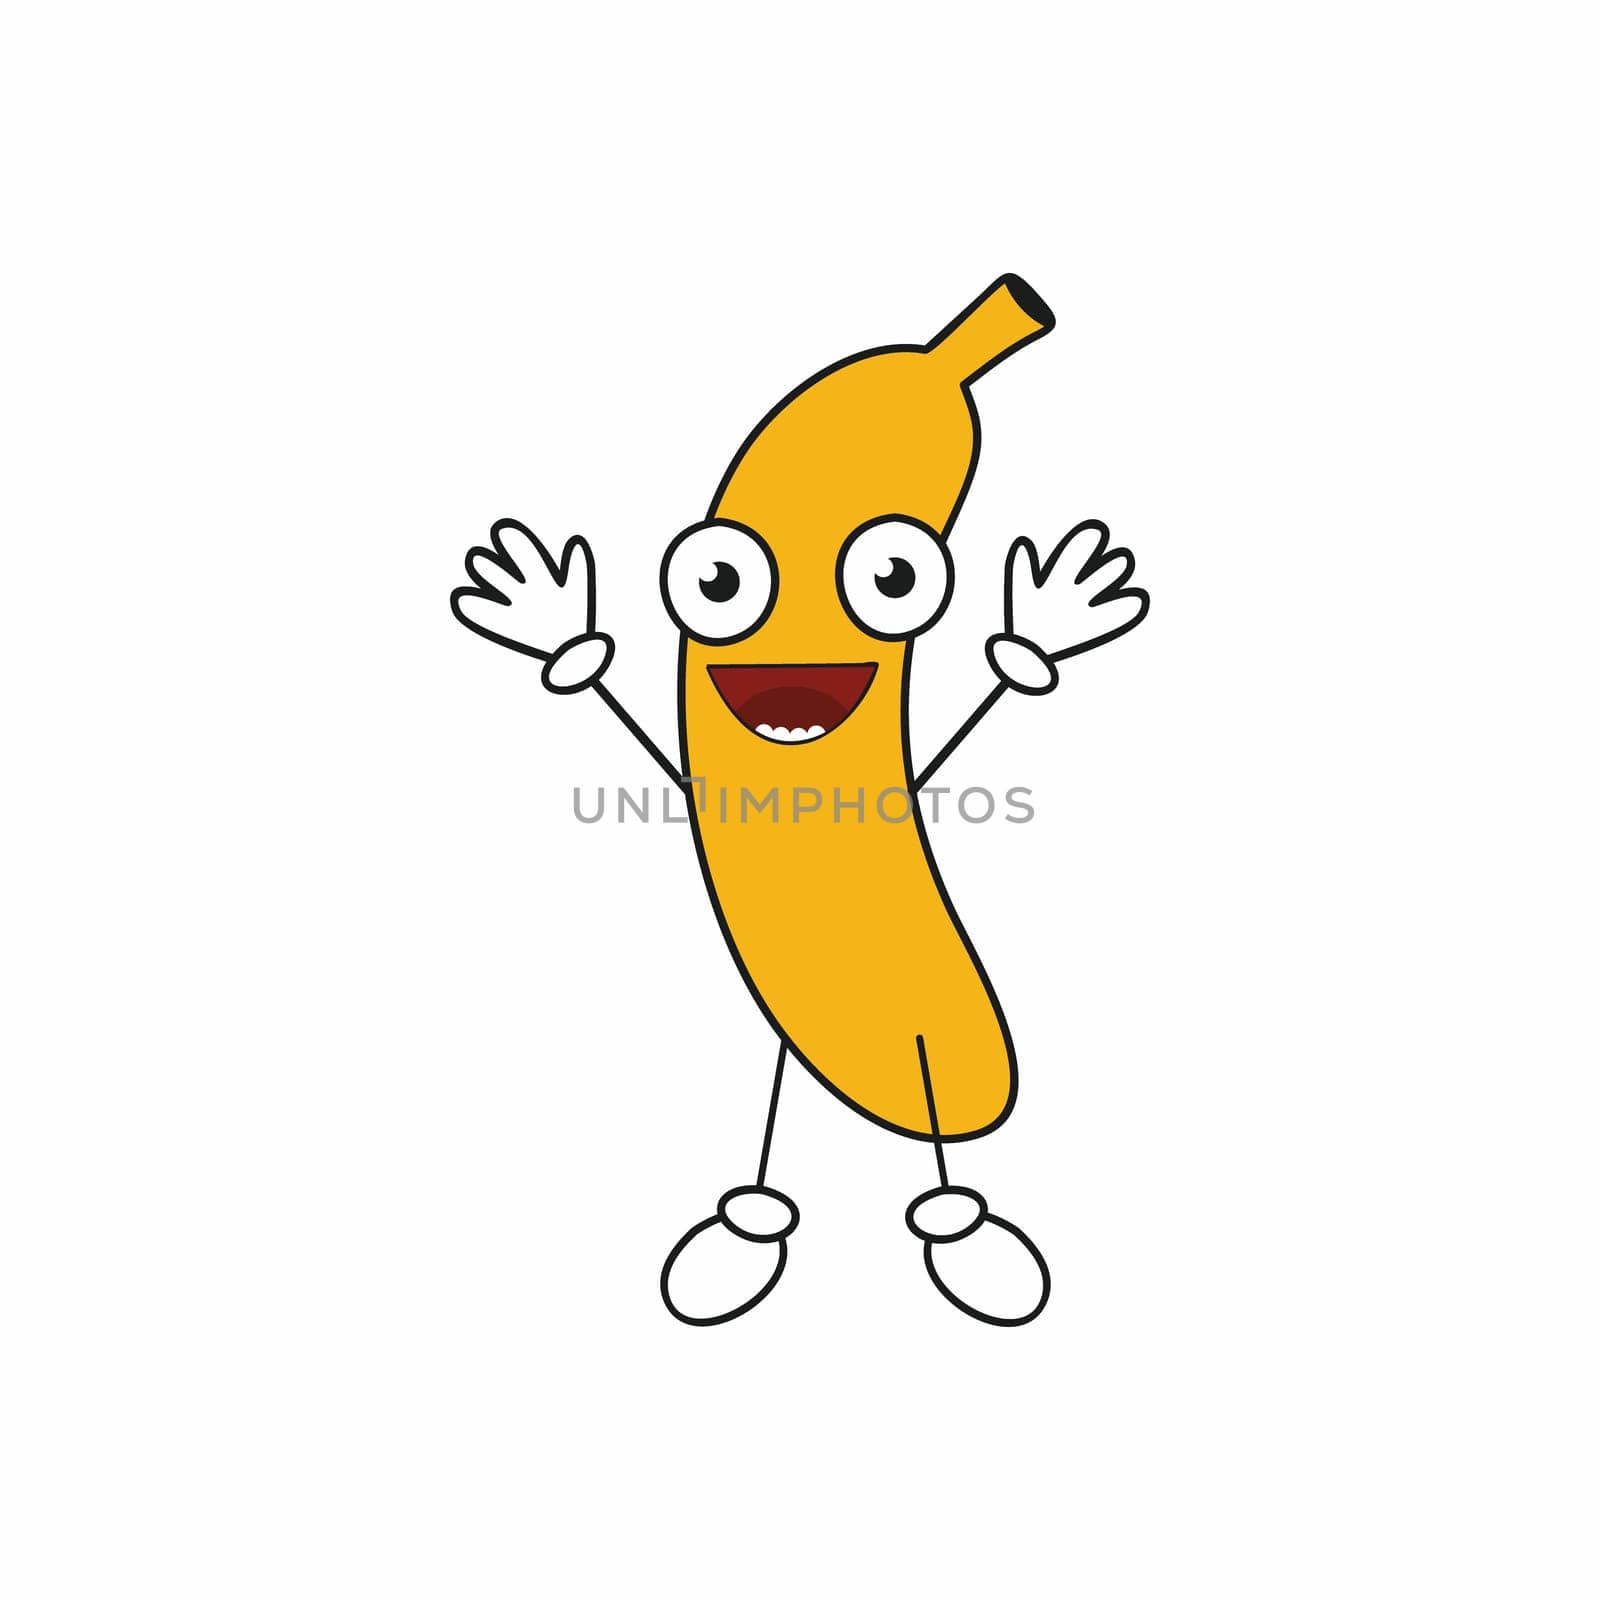 Cheerful banana with big eyes welcomes. Smiley face for social networks